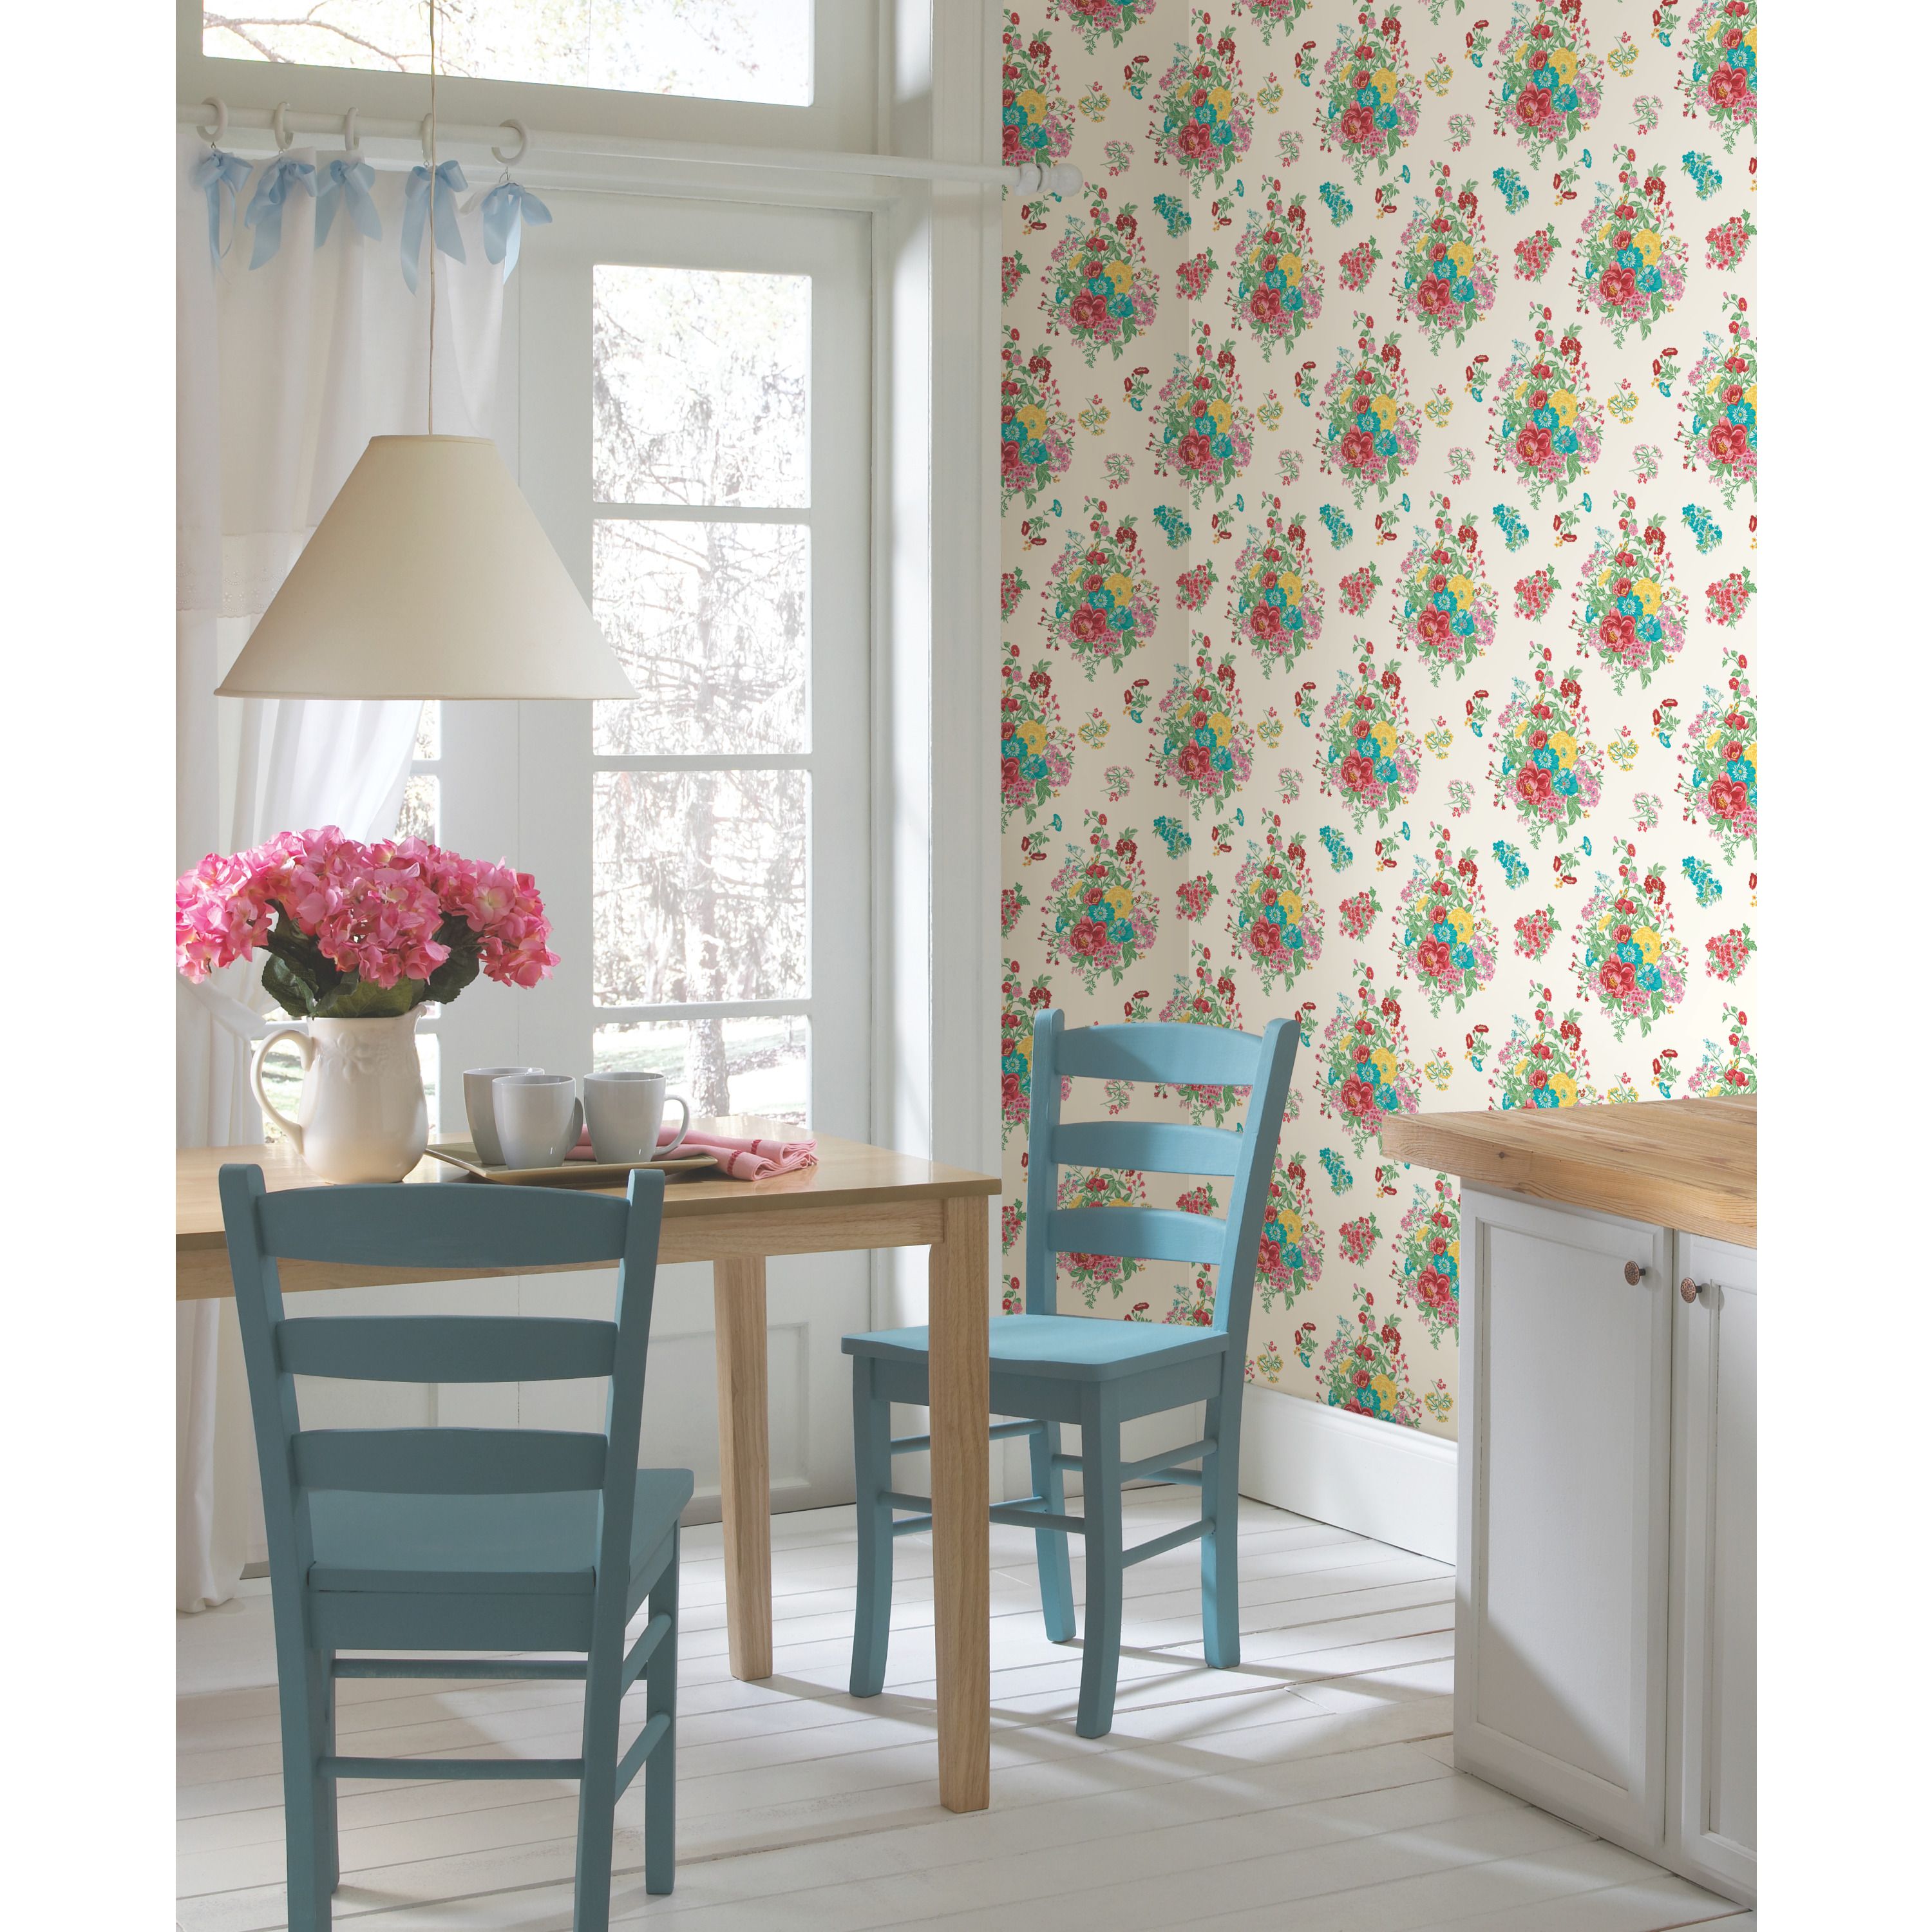 The Pioneer Woman Wallpaper at Walmart - How to Buy Ree Drummond's New  Wallpaper